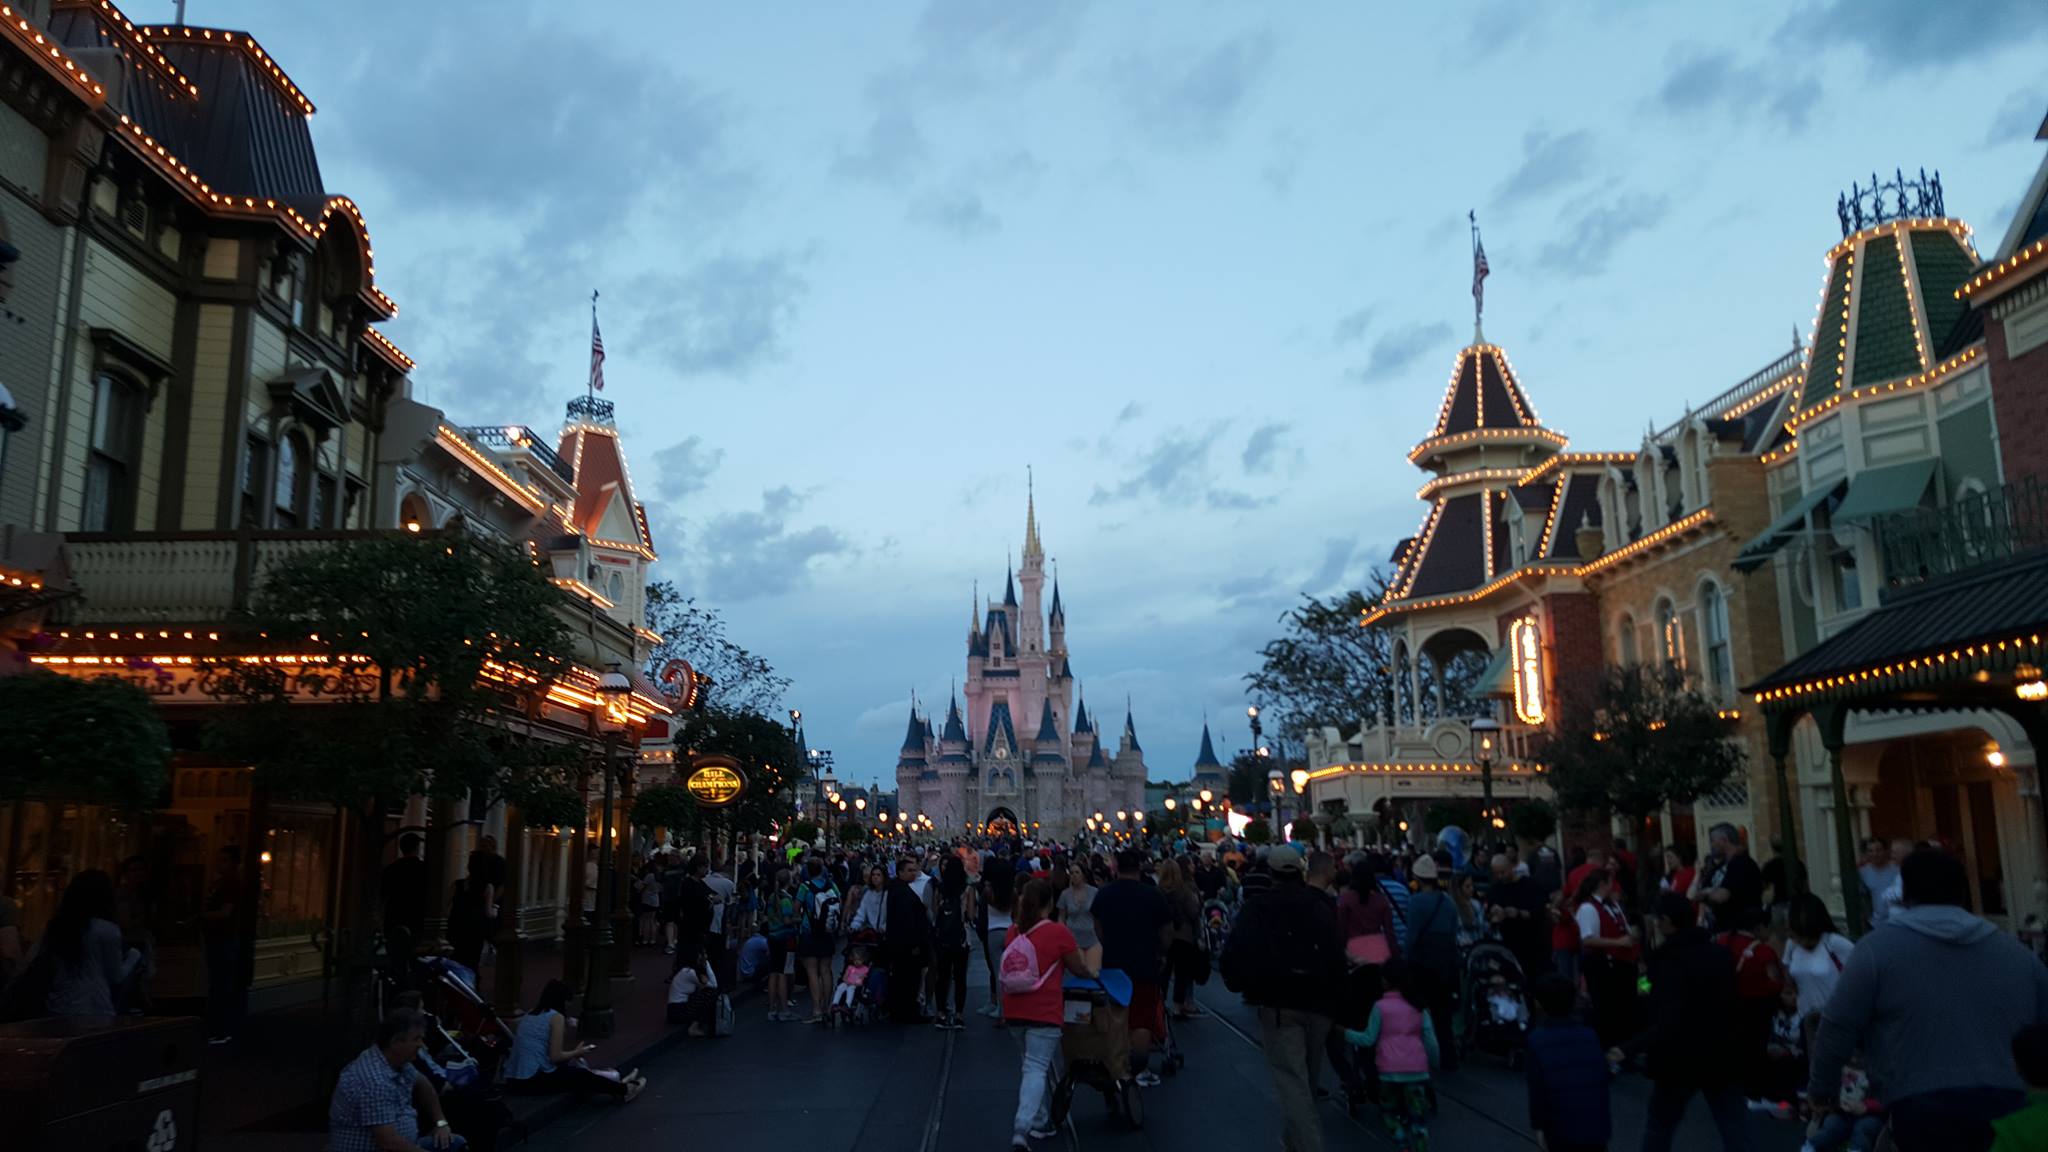 New “Disney After Hours” tickets available for purchase for an additional 3 hours at Magic Kingdom